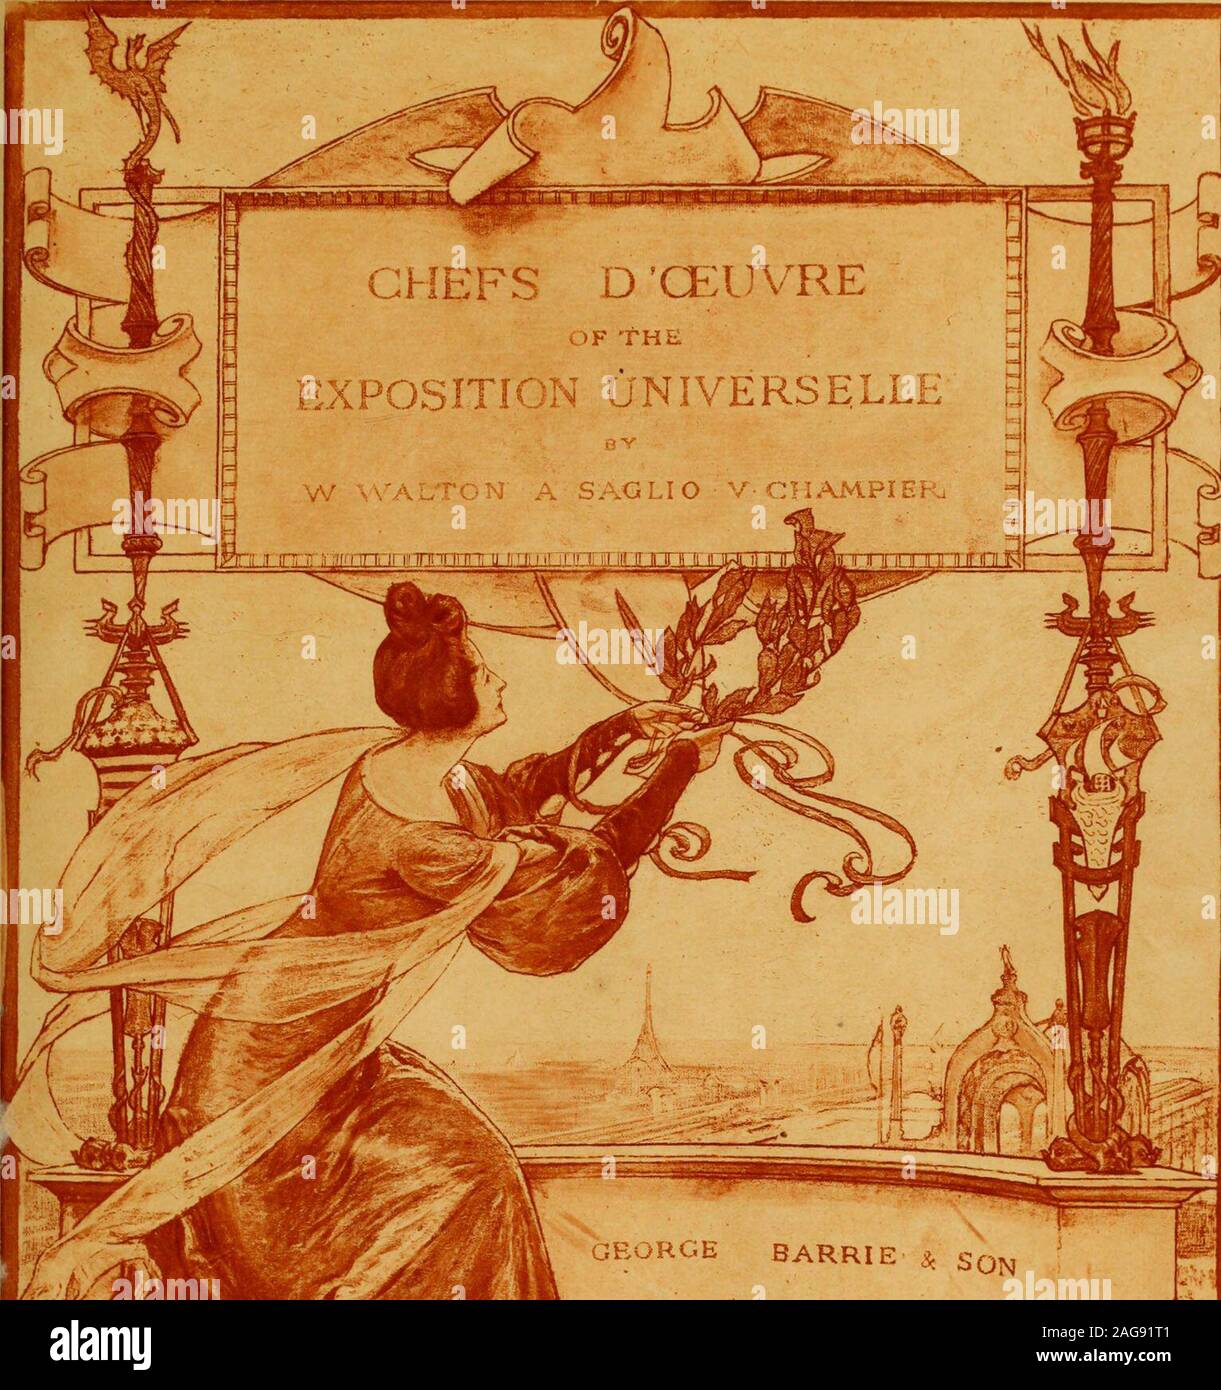 . Exposition universelle, 1900 : the chefs-d'uvre. .1V. ? 7:: i .y• ?Tt^^7-^T. ??lit- T^!^^^*?l^^J?Sly^^yiiJT^l&gt;??T.!?*&lt;^^^t^T^?^*^^tTs. S^Ji r: -^ . ^ ^um^™; ^ JEi s^mmm0^- ^^ mfl^ ? — Jl w i-. ..&gt;v.;f 7.i --r-- .^A [i *,;,,^.&gt;&gt;&lt; :Sfe- ^ , tf m^ GEORGE BARRIE ^ sqnPUBLISHERS P?iILADELPHL/ OGu.fia!)»» CHEFS-DOEUVRE OF THE EXPOSITION UNIVERSELLE1900 INDIA-PROOF EDITION LIMITED TO ONE THOUSAND COMPLETE NUMBERED COPIES Digitized by the Internet Archivein 2012 with funding fromBrigham Young University archive.org/details/expositionuniver10waltexpositionunive... Stock Photo